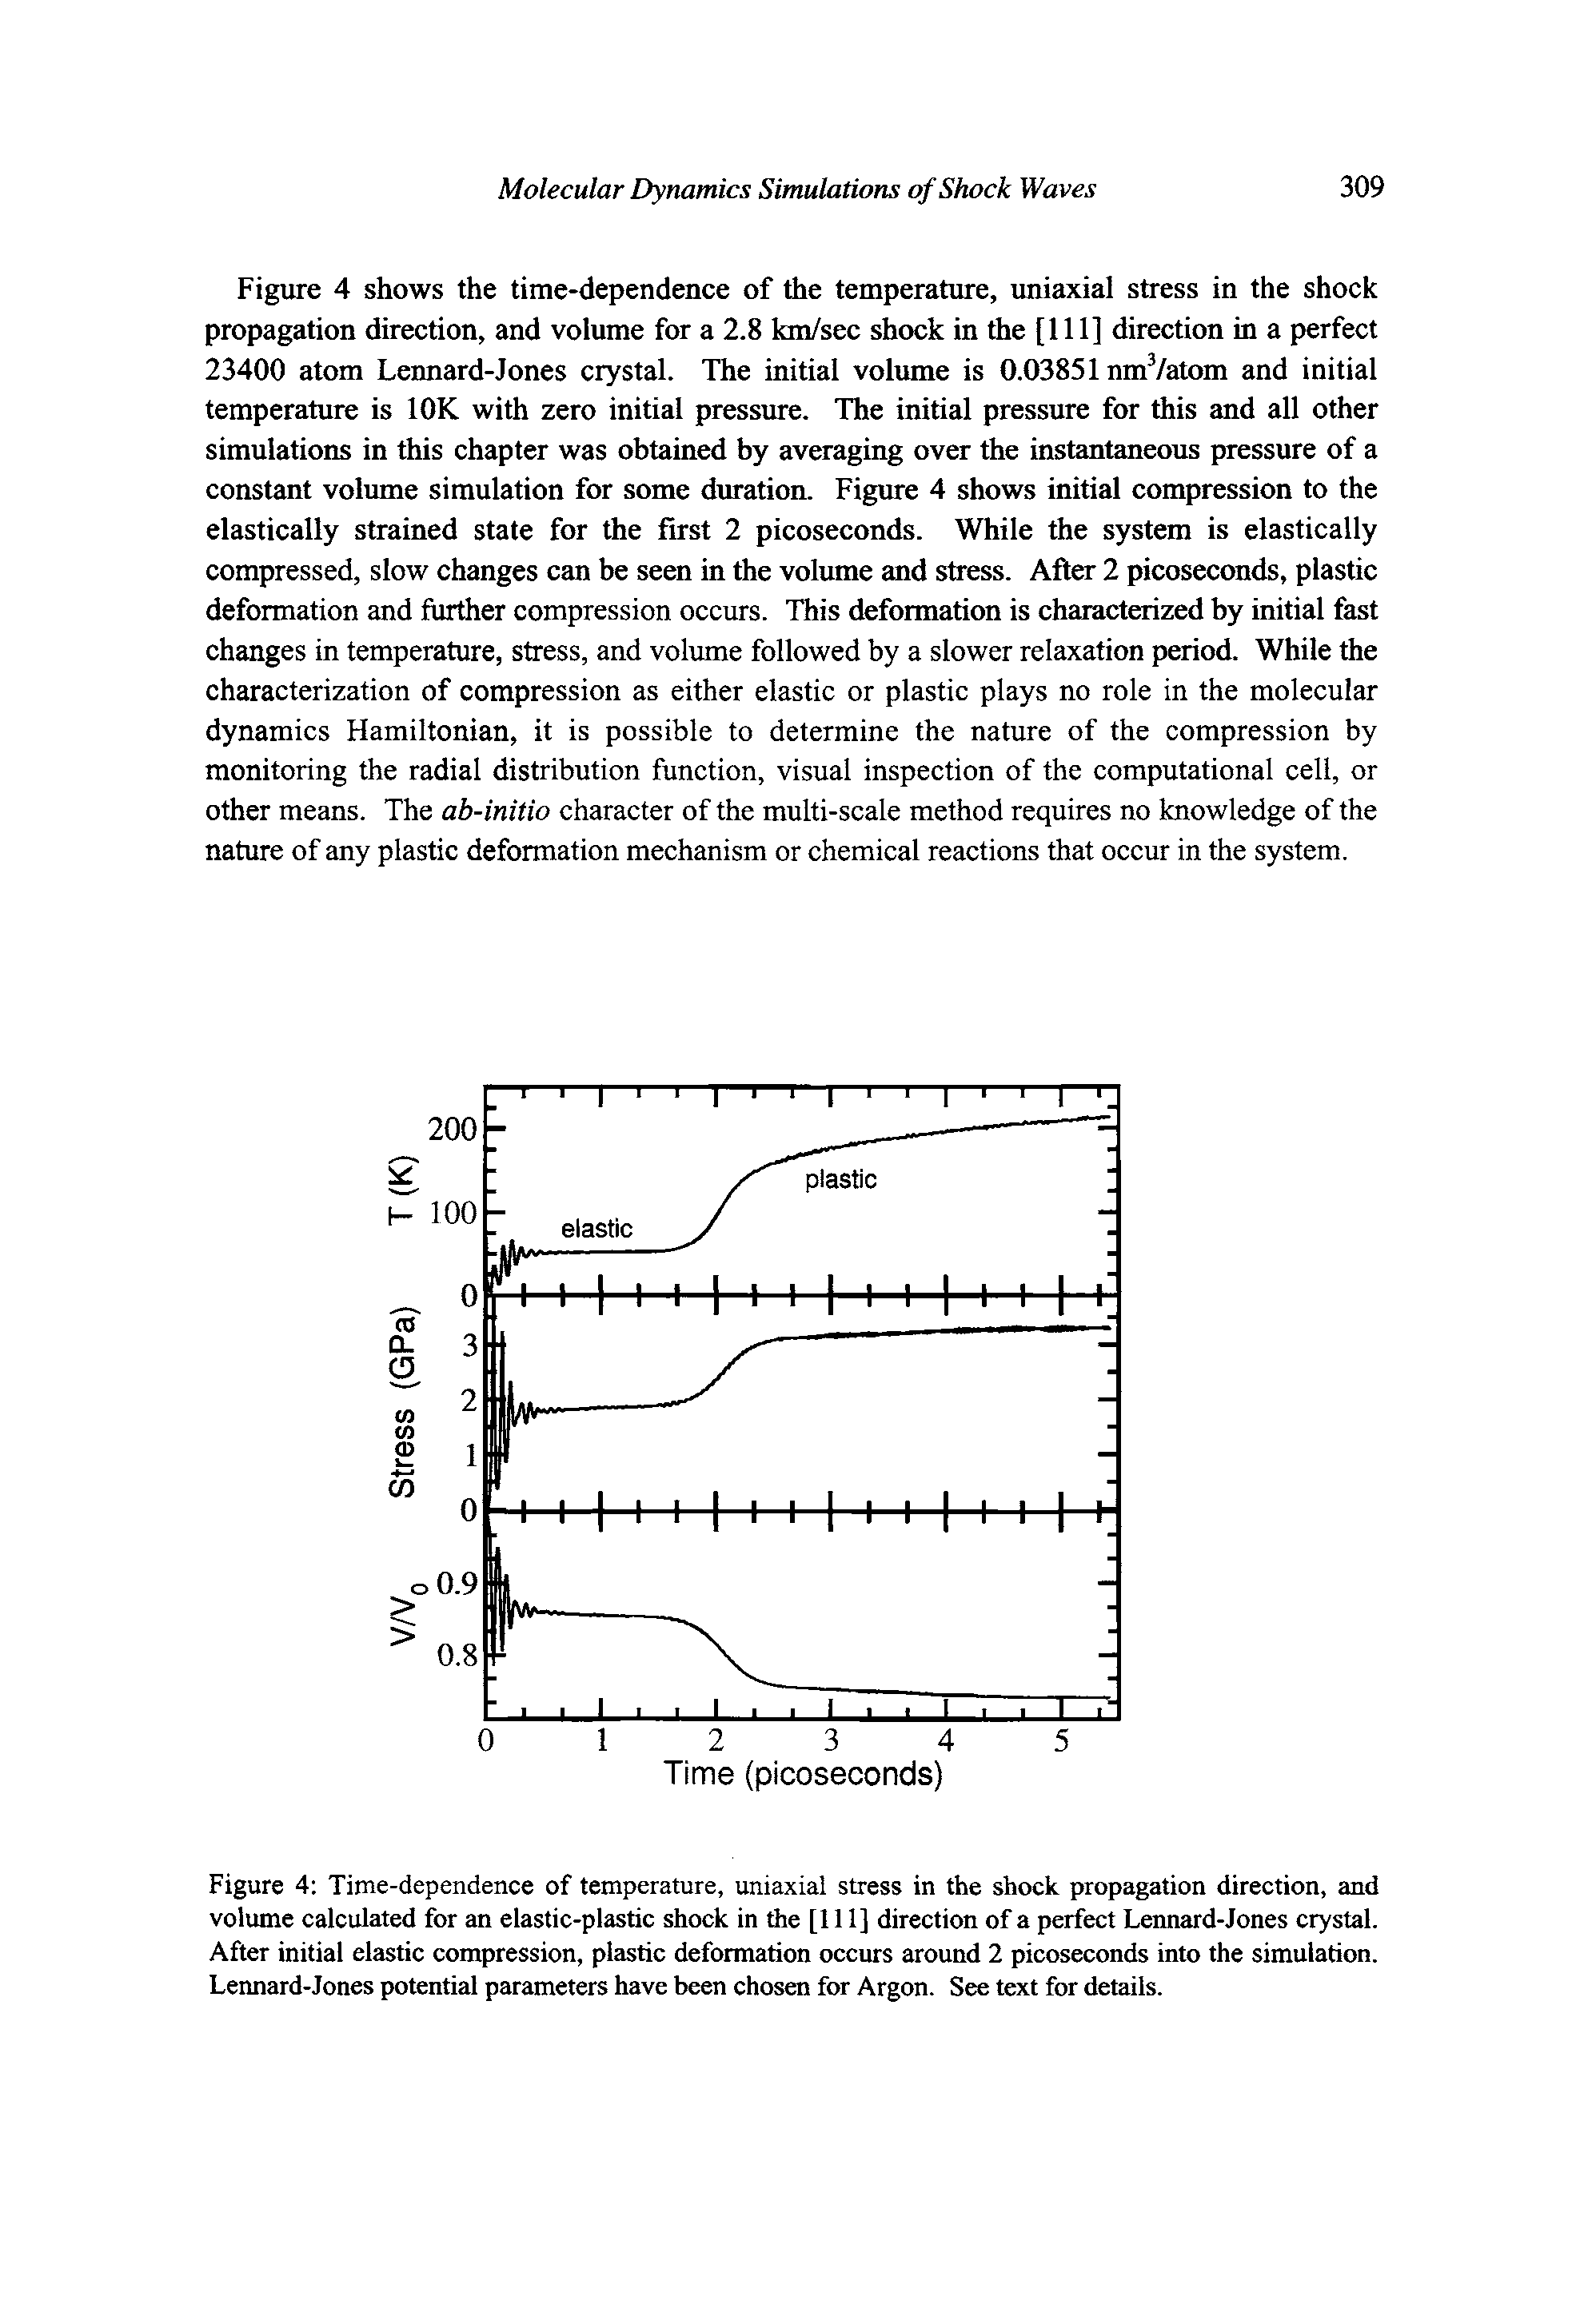 Figure 4 Time-dependence of temperature, uniaxial stress in the shock propagation direction, and volume calculated for an elastic-plastic shock in the [111] direction of a perfect Lennard-Jones crystal. After initial elastic compression, pltistic deformation occurs around 2 picoseconds into the simulation. Lennard-Jones potential parameters have been chosen for Argon. See text for details.